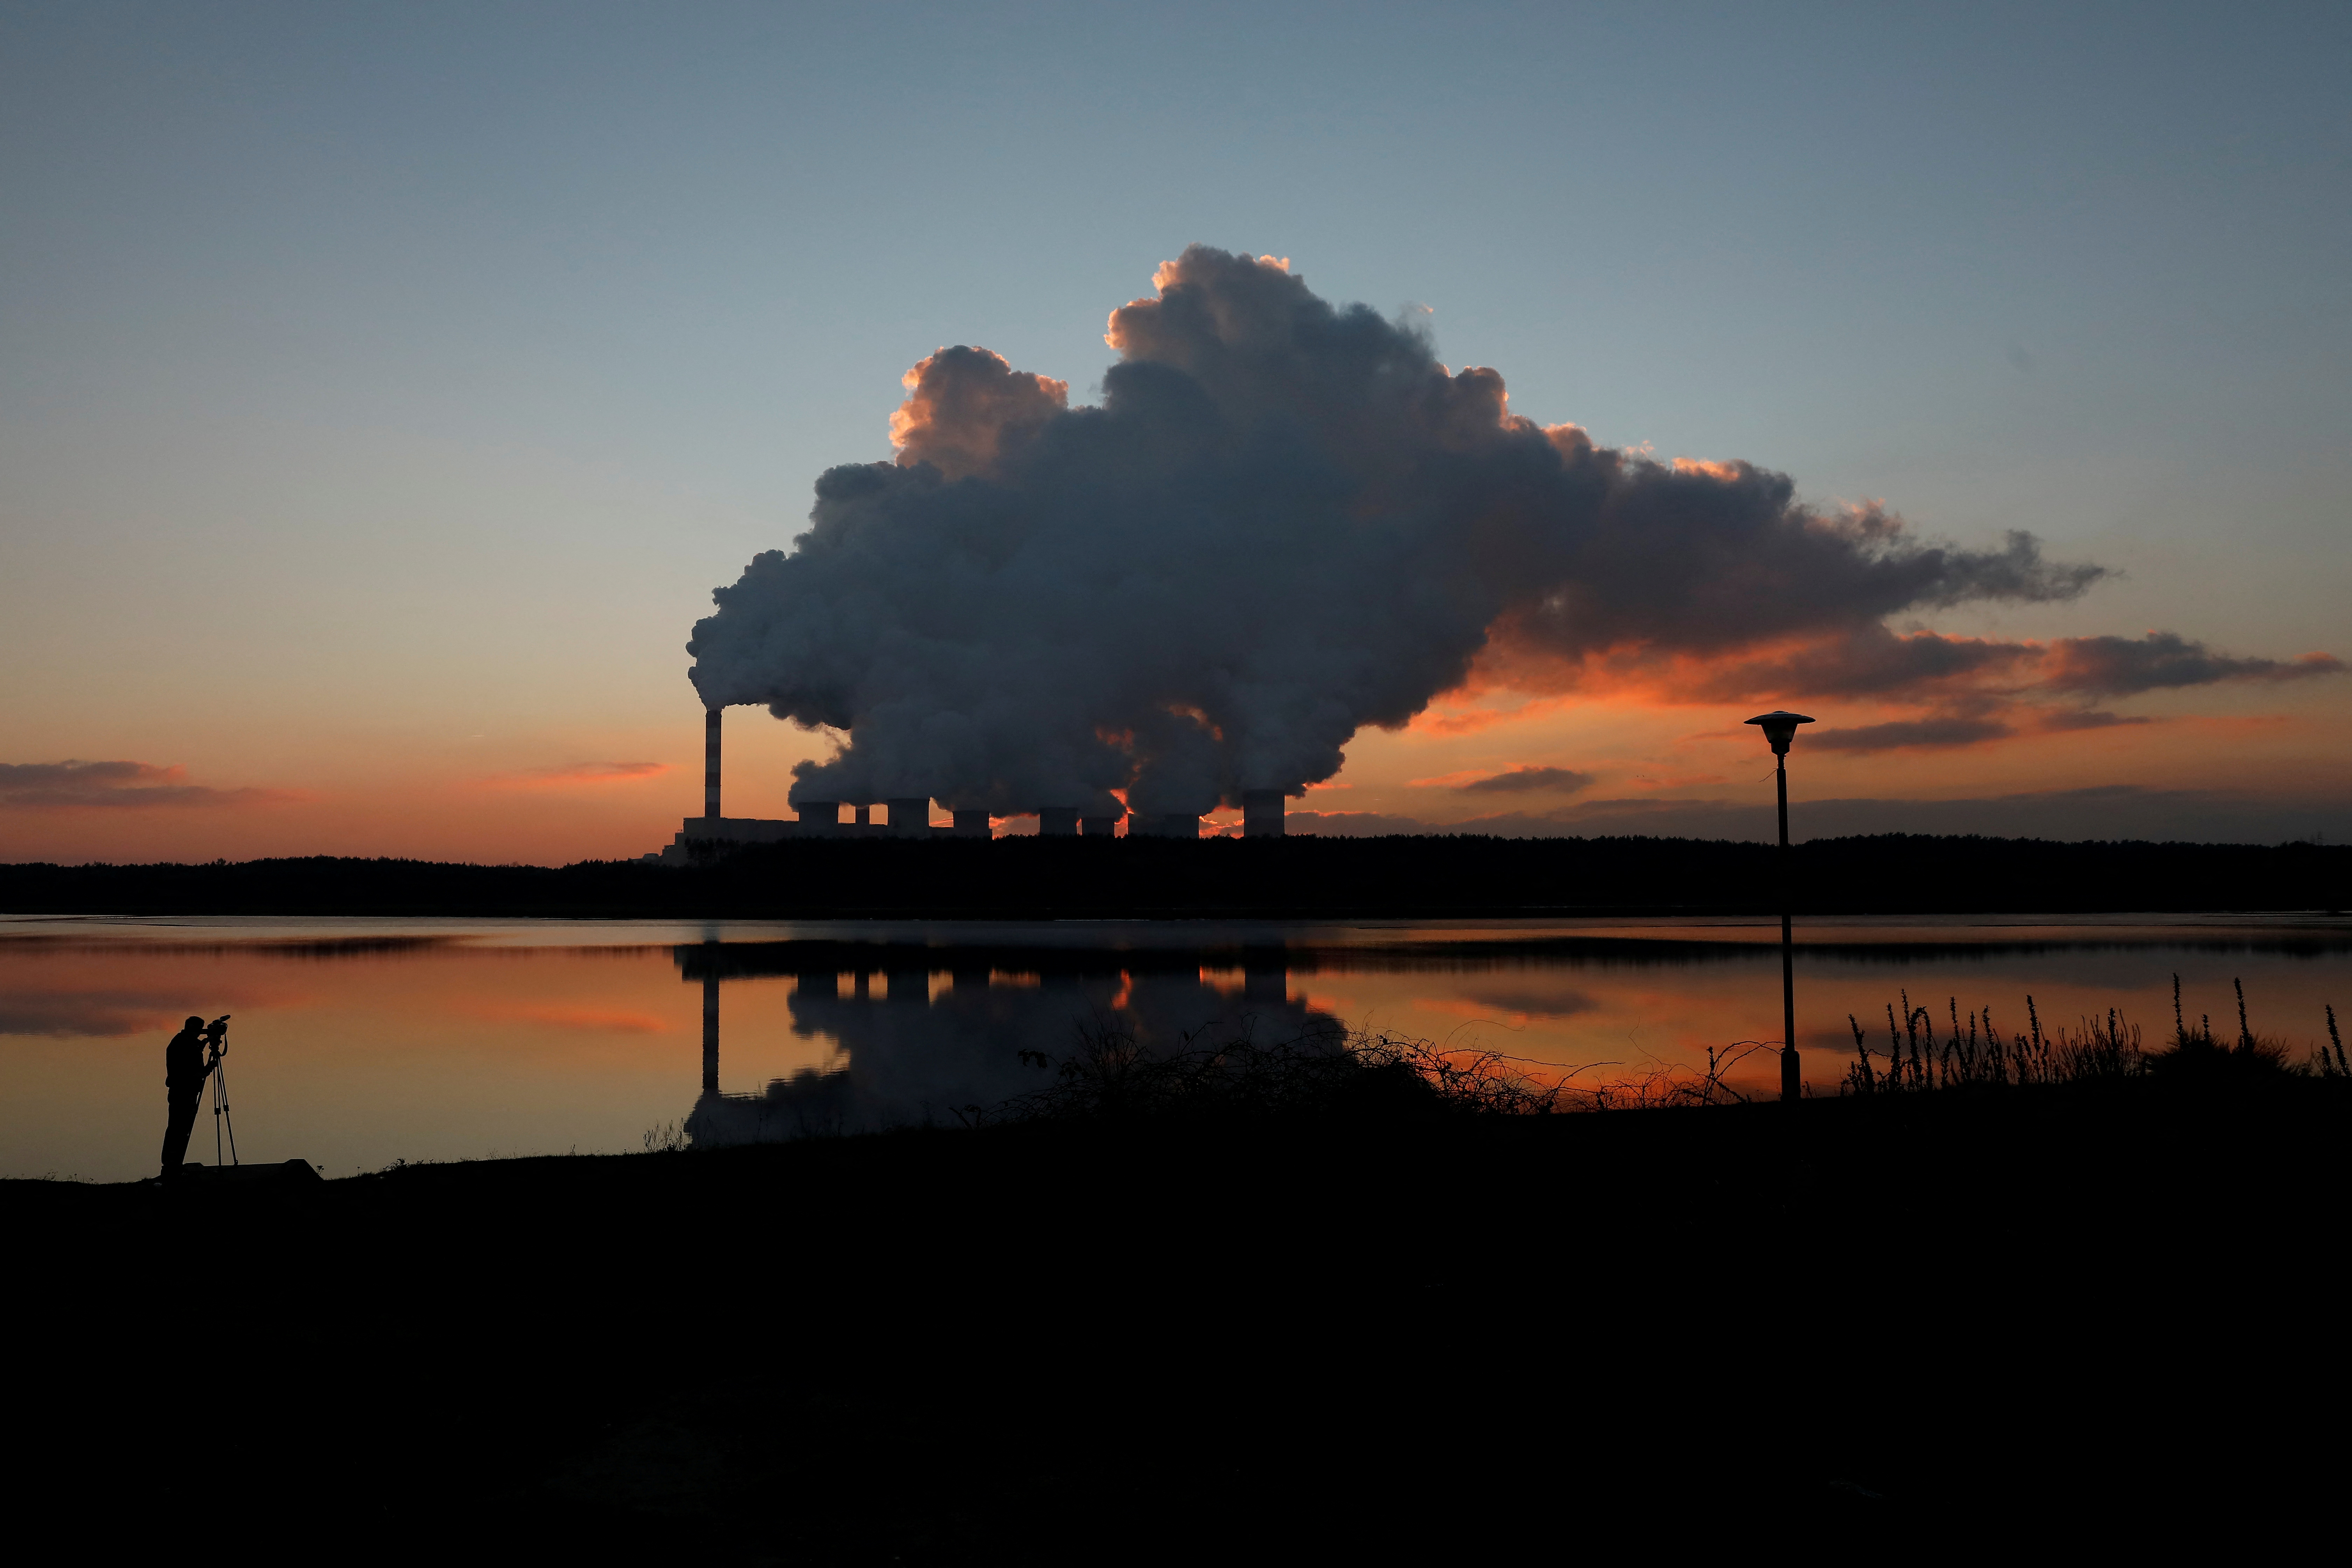 Smoke and steam billows from Belchatow Power Station, Europe's largest coal-fired power plant operated by PGE Group, near Belchatow,